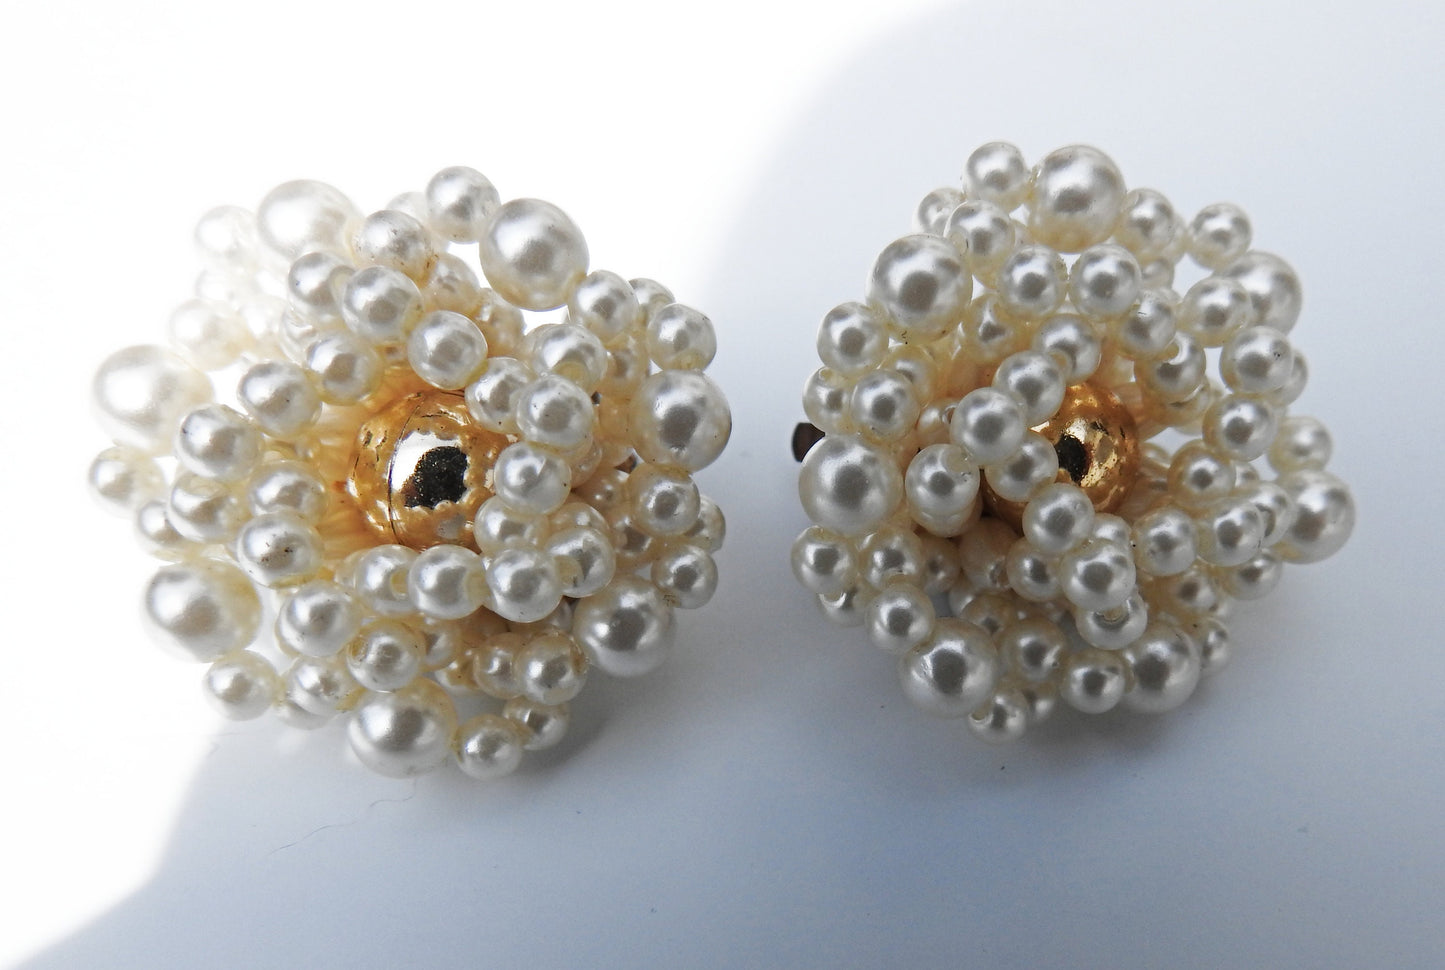 Large pearl cluster clip on earrings, vintage, with faux pearls and old-fashioned charm. Great gift for mom, sister, grandma